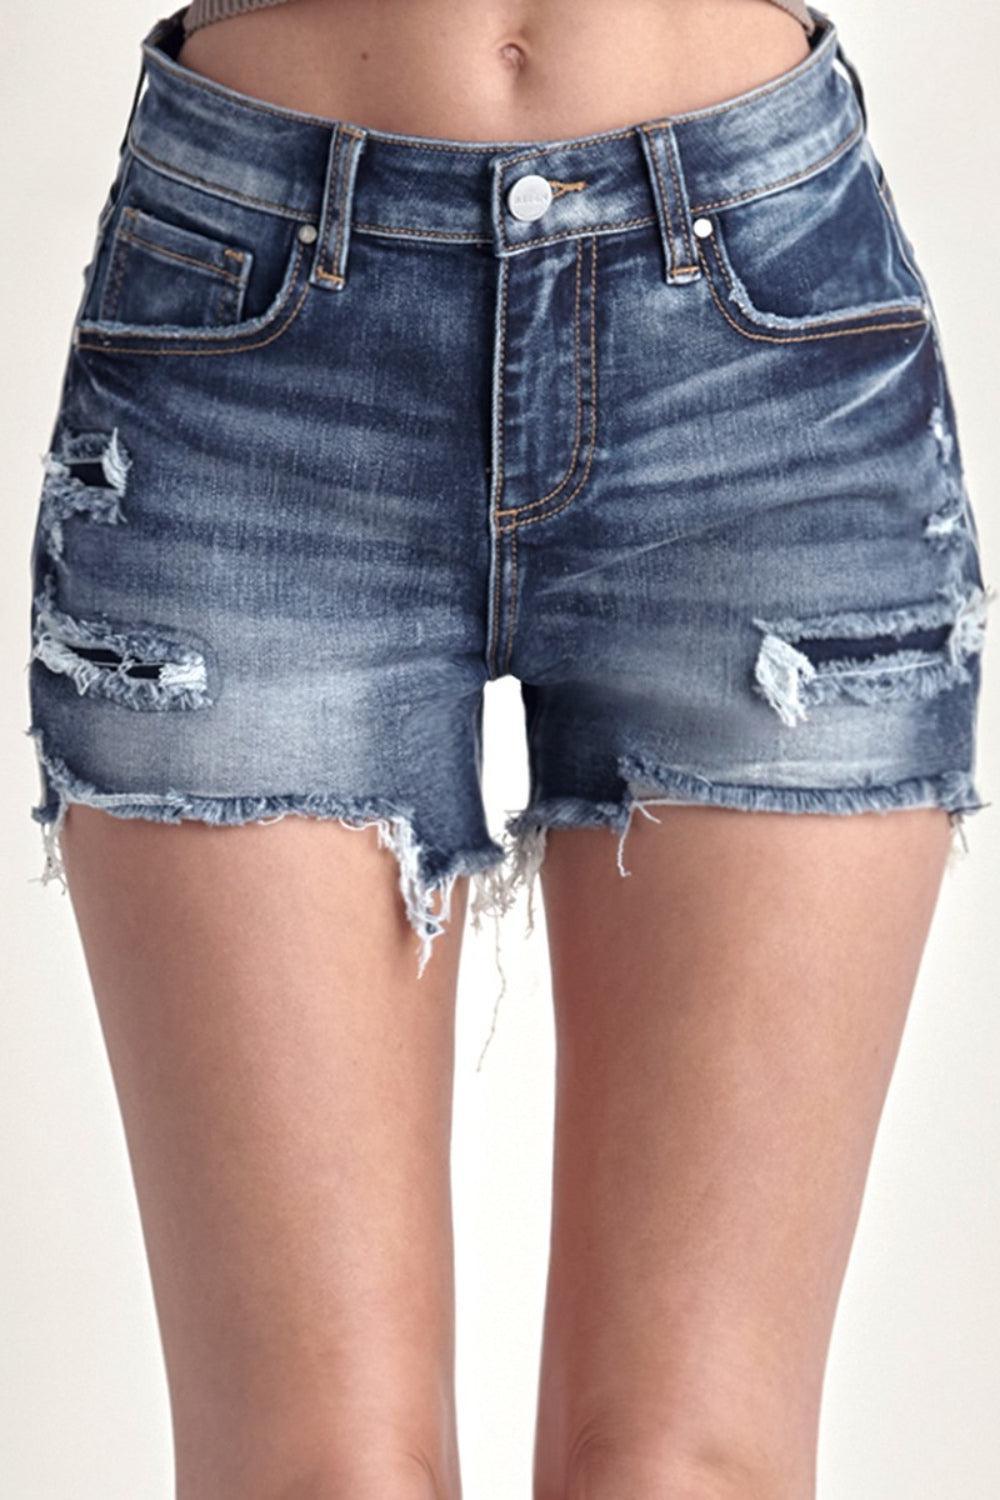 a woman wearing a pair of shorts with holes